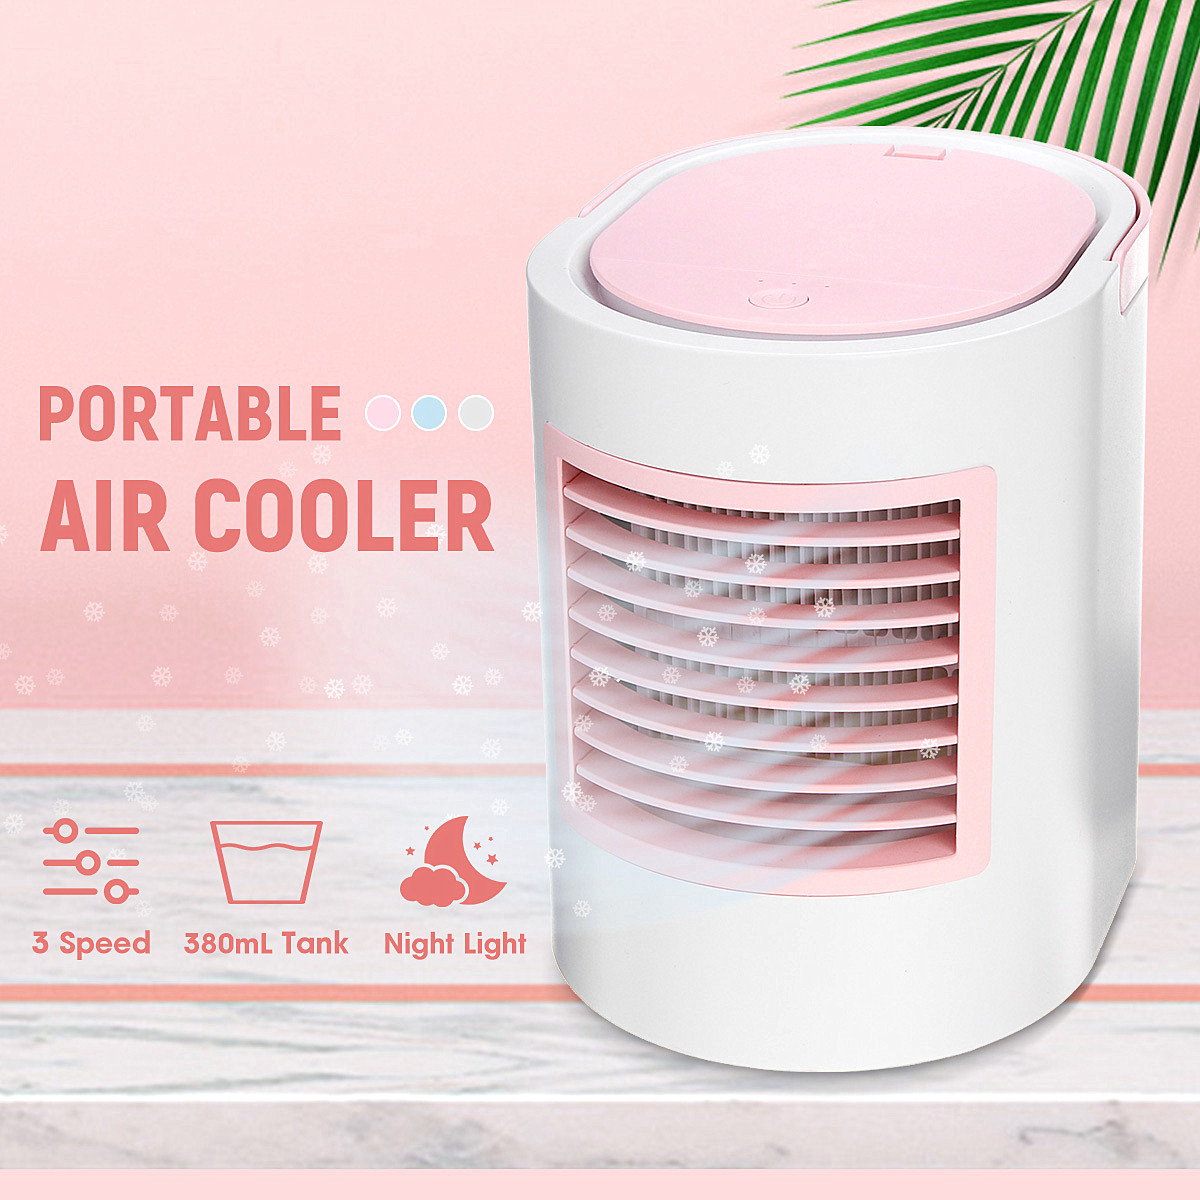 5V 3 Speeds Portable Air Cooler USB Oval Air Conditioner Fan Mini Water Cooling Fan Conditioner